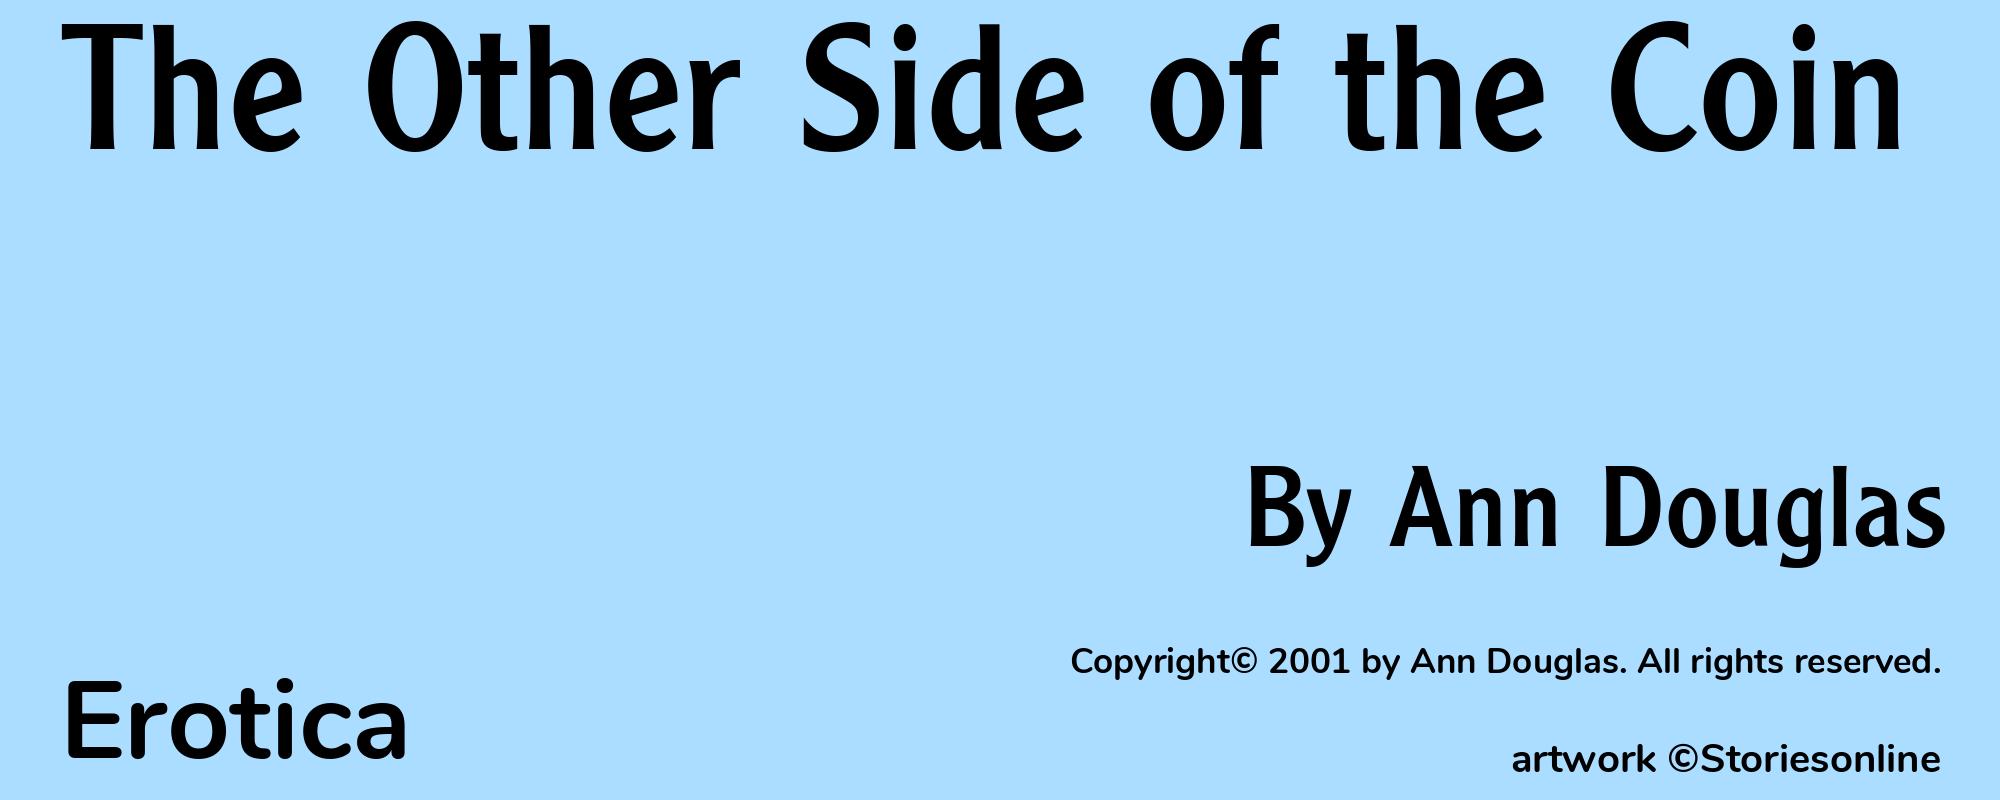 The Other Side of the Coin - Cover